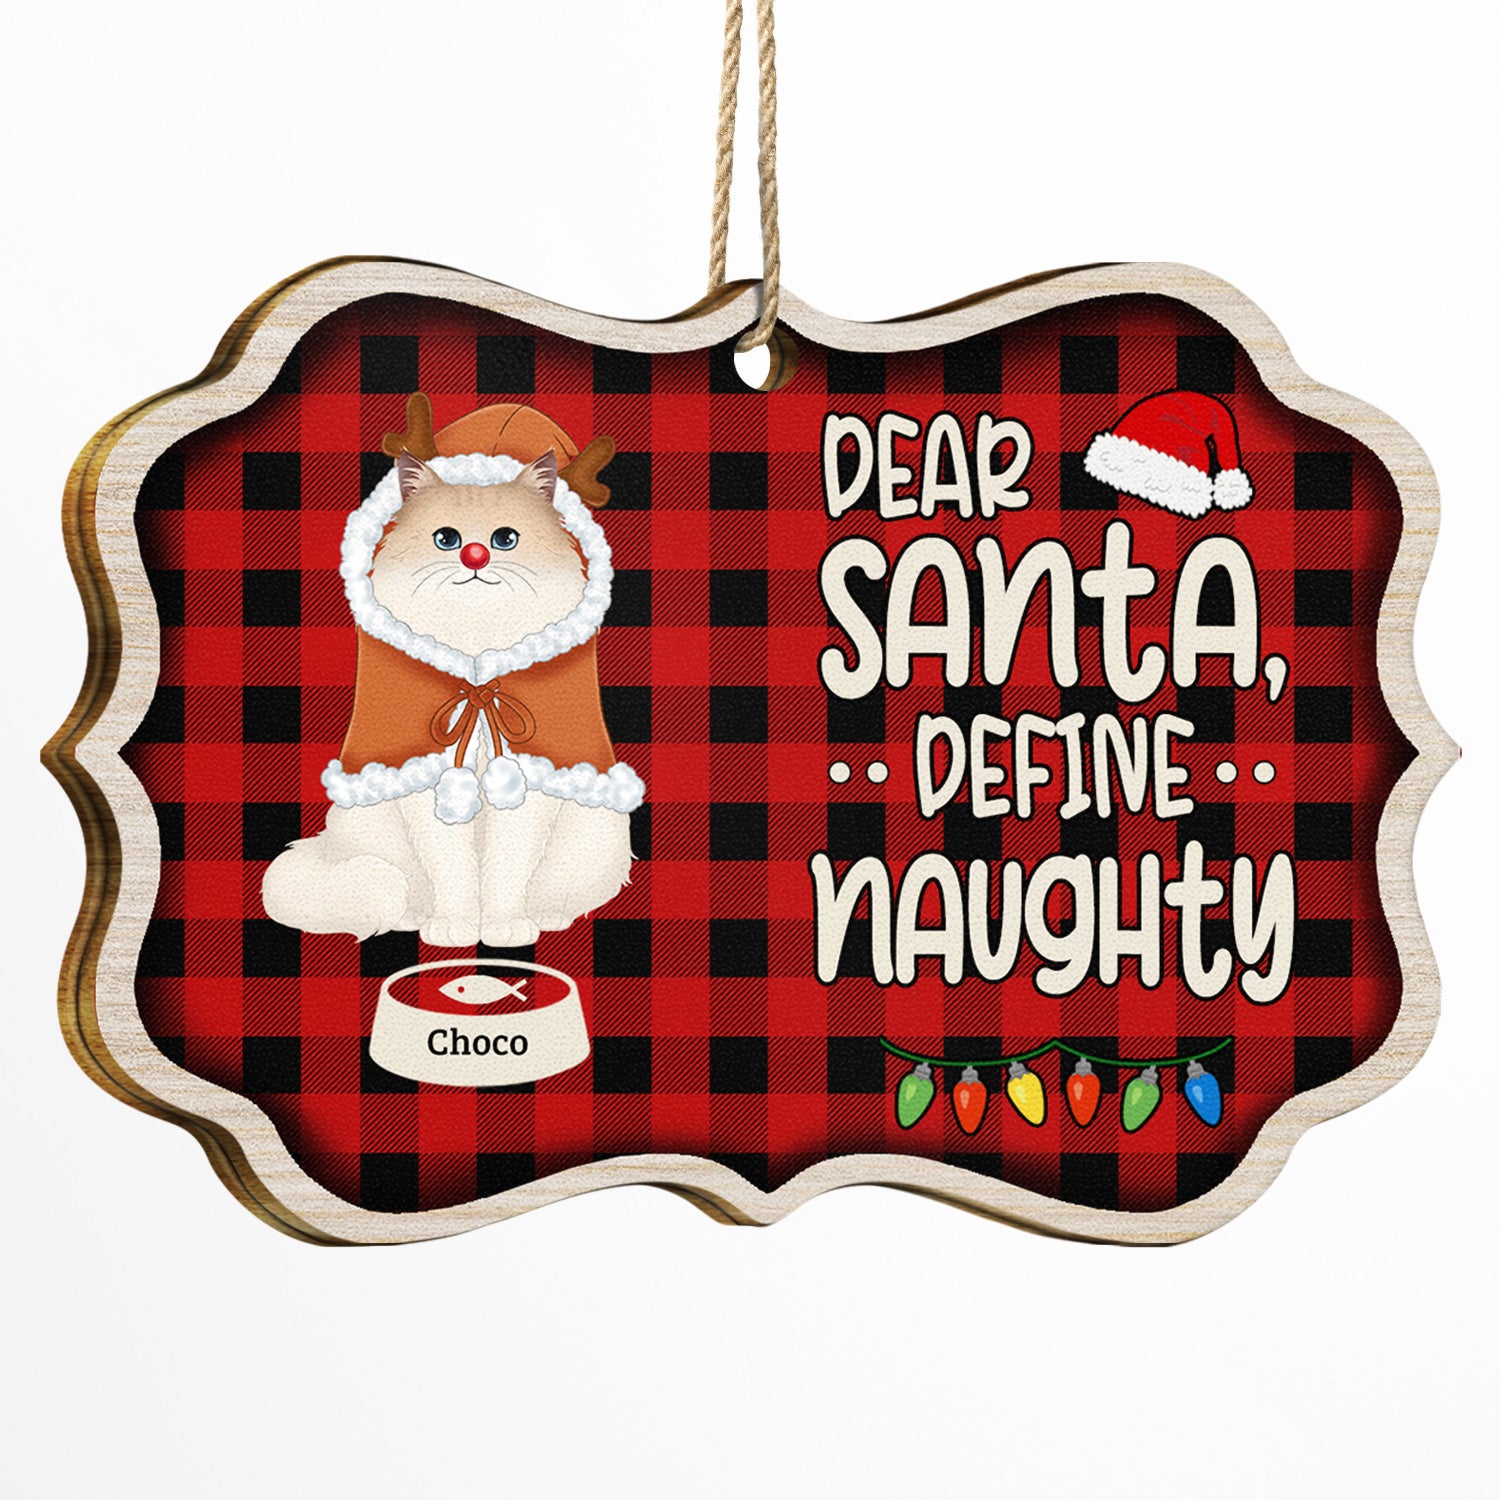 Dear Santa Define Naughty - Christmas Gift For Cat Lovers - Personalized Medallion Wooden Ornament